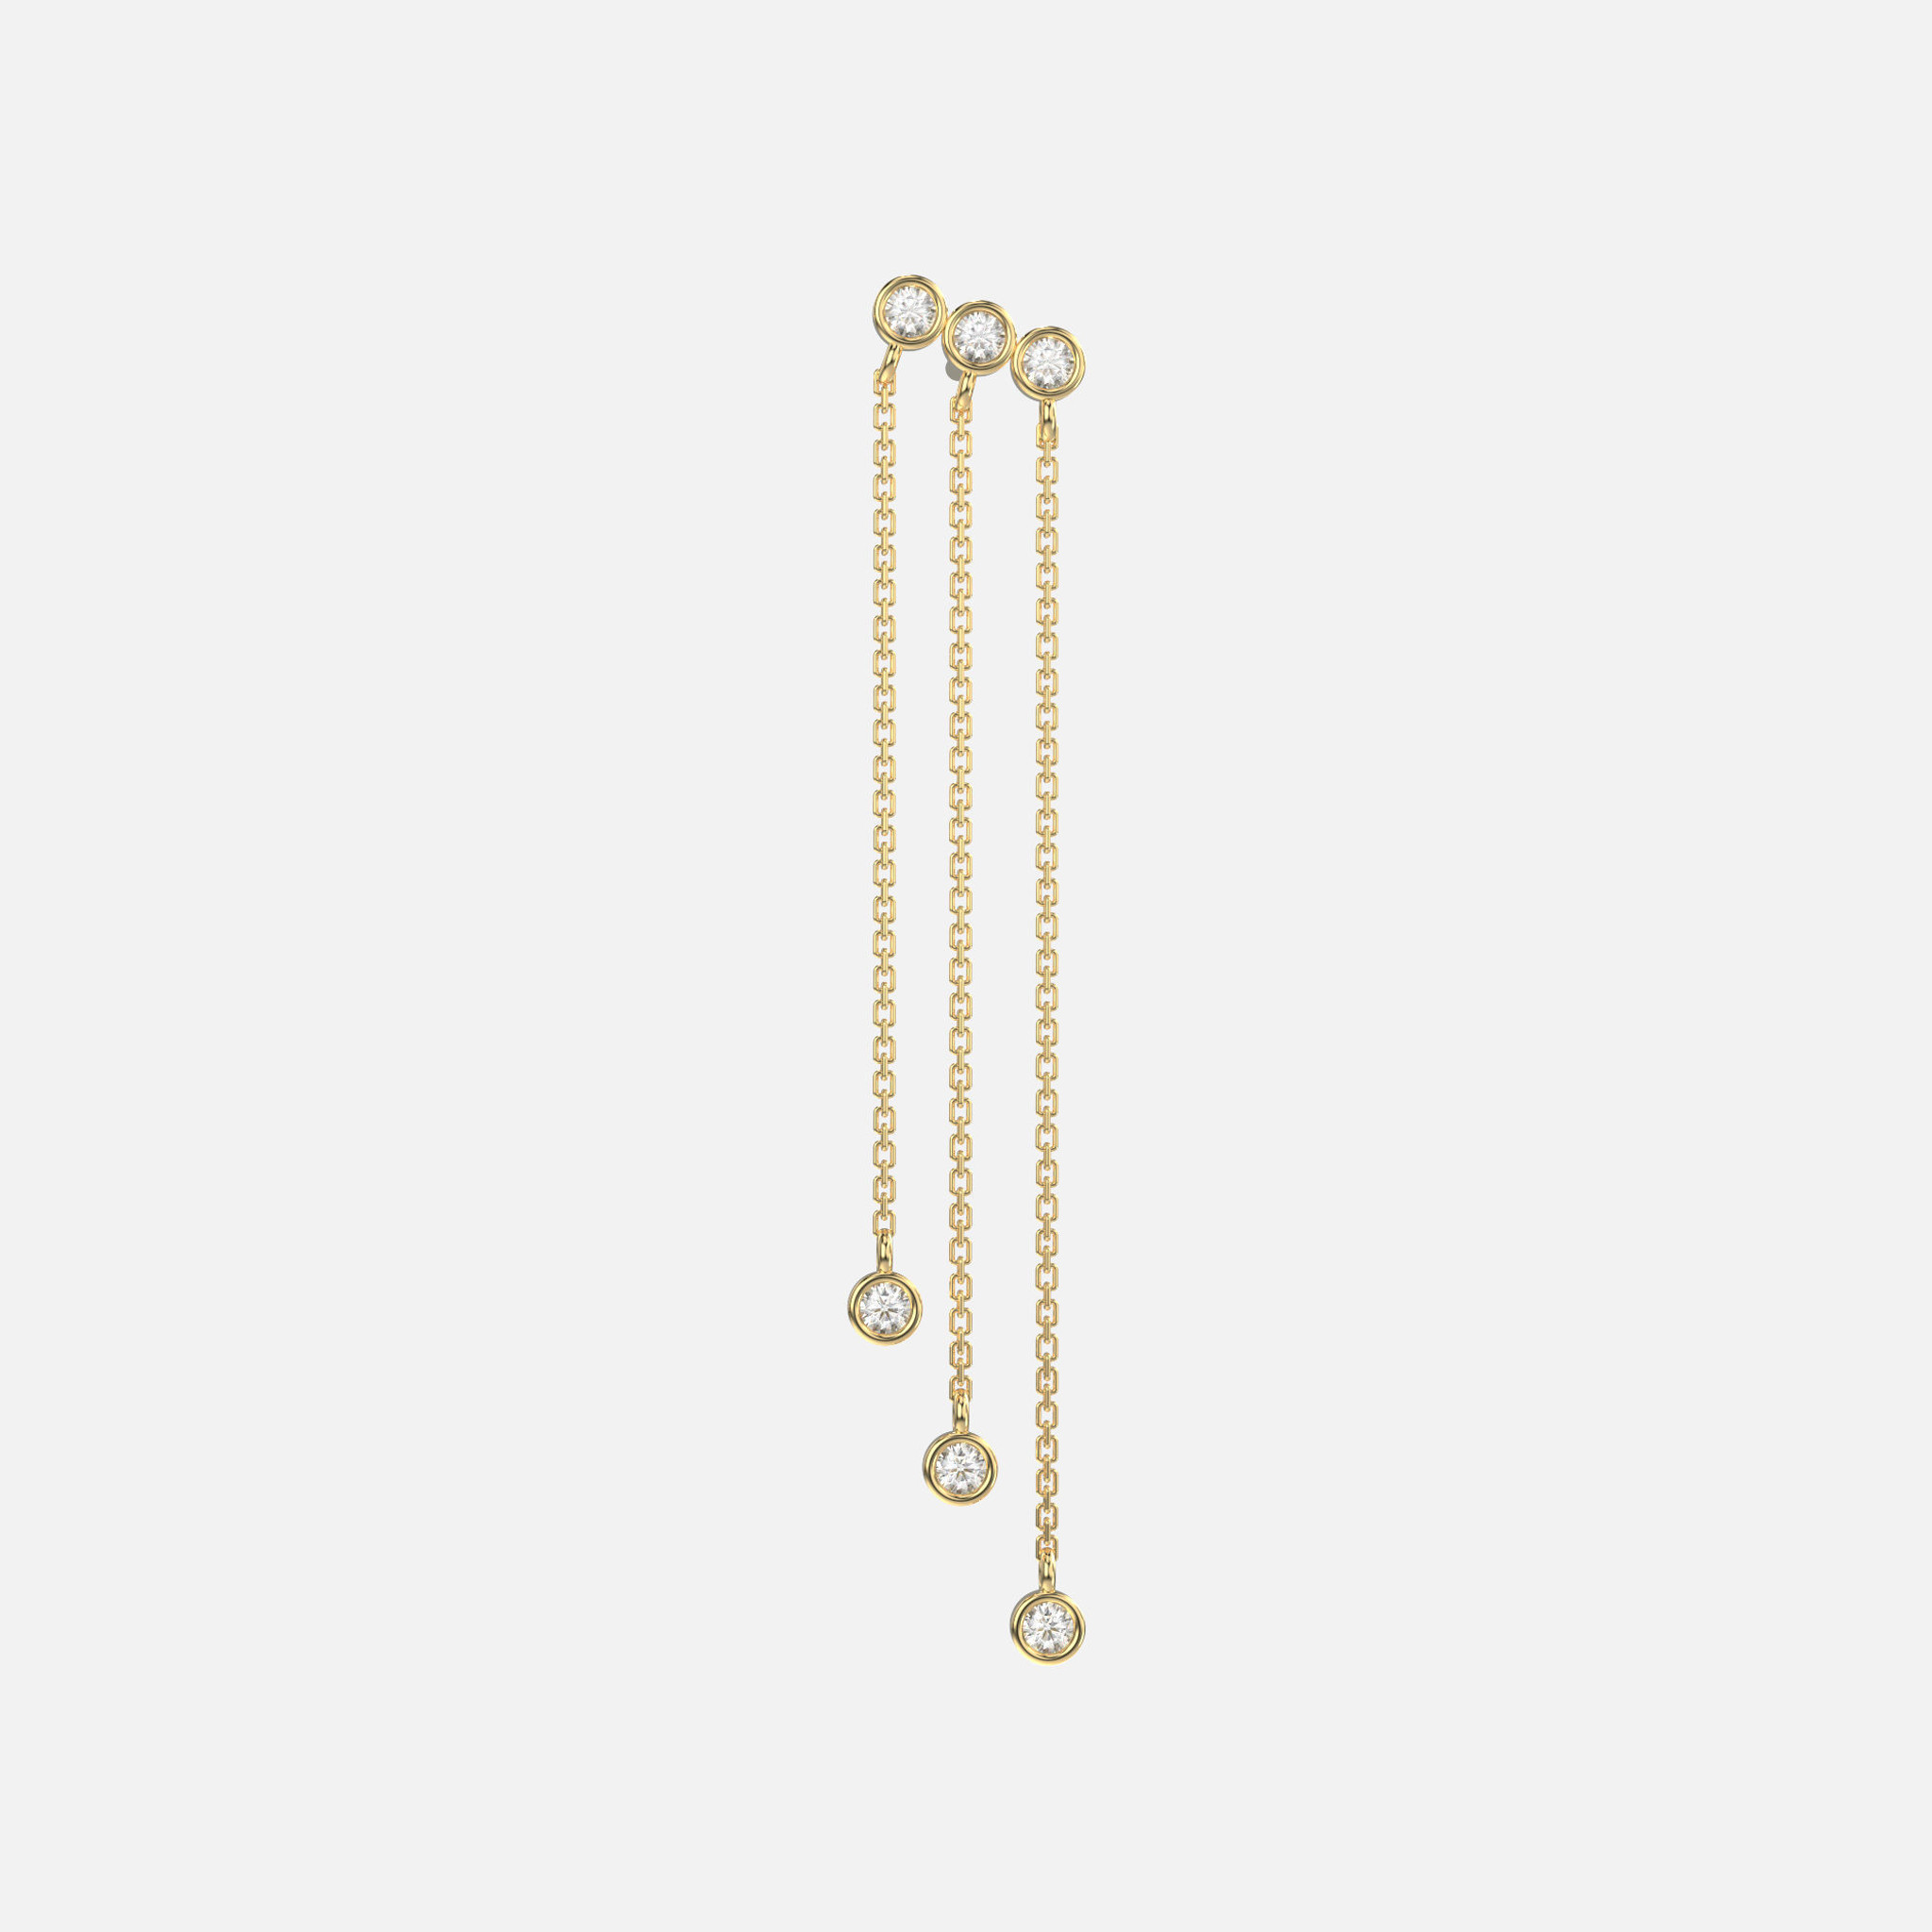 These 14k gold earrings feature a trio of bezel-set diamonds, hanging from three cable chain strands with matching bezel diamonds.